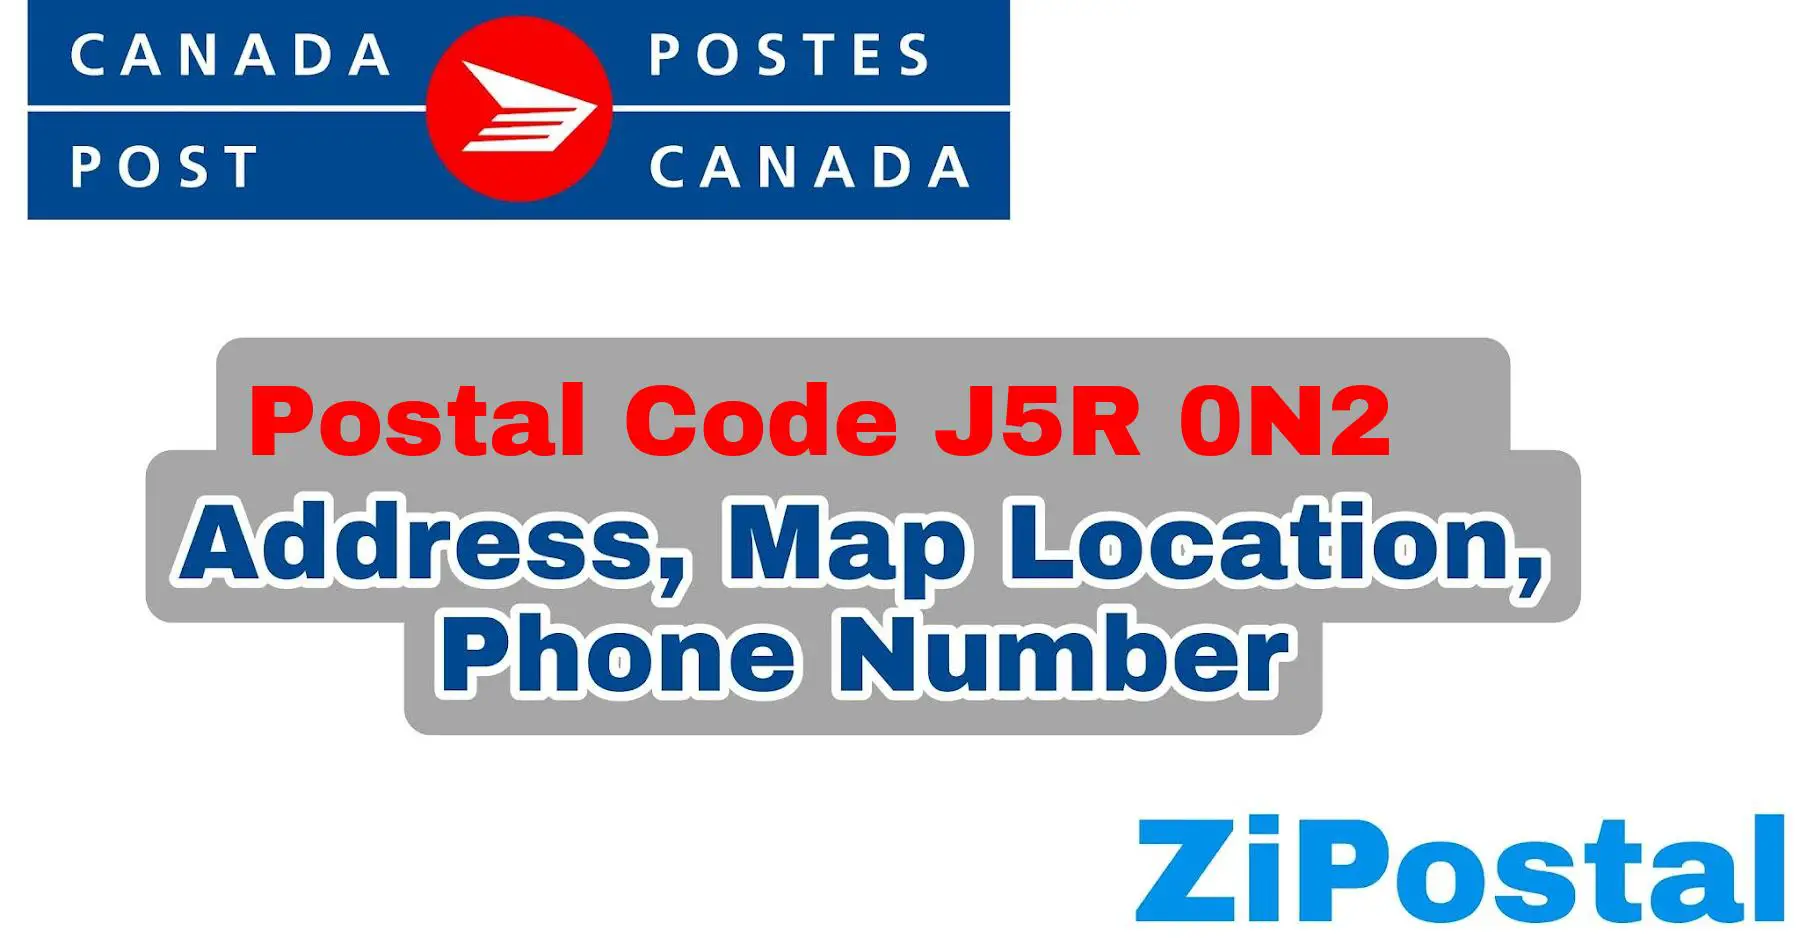 Postal Code J5R 0N2 Address Map Location and Phone Number